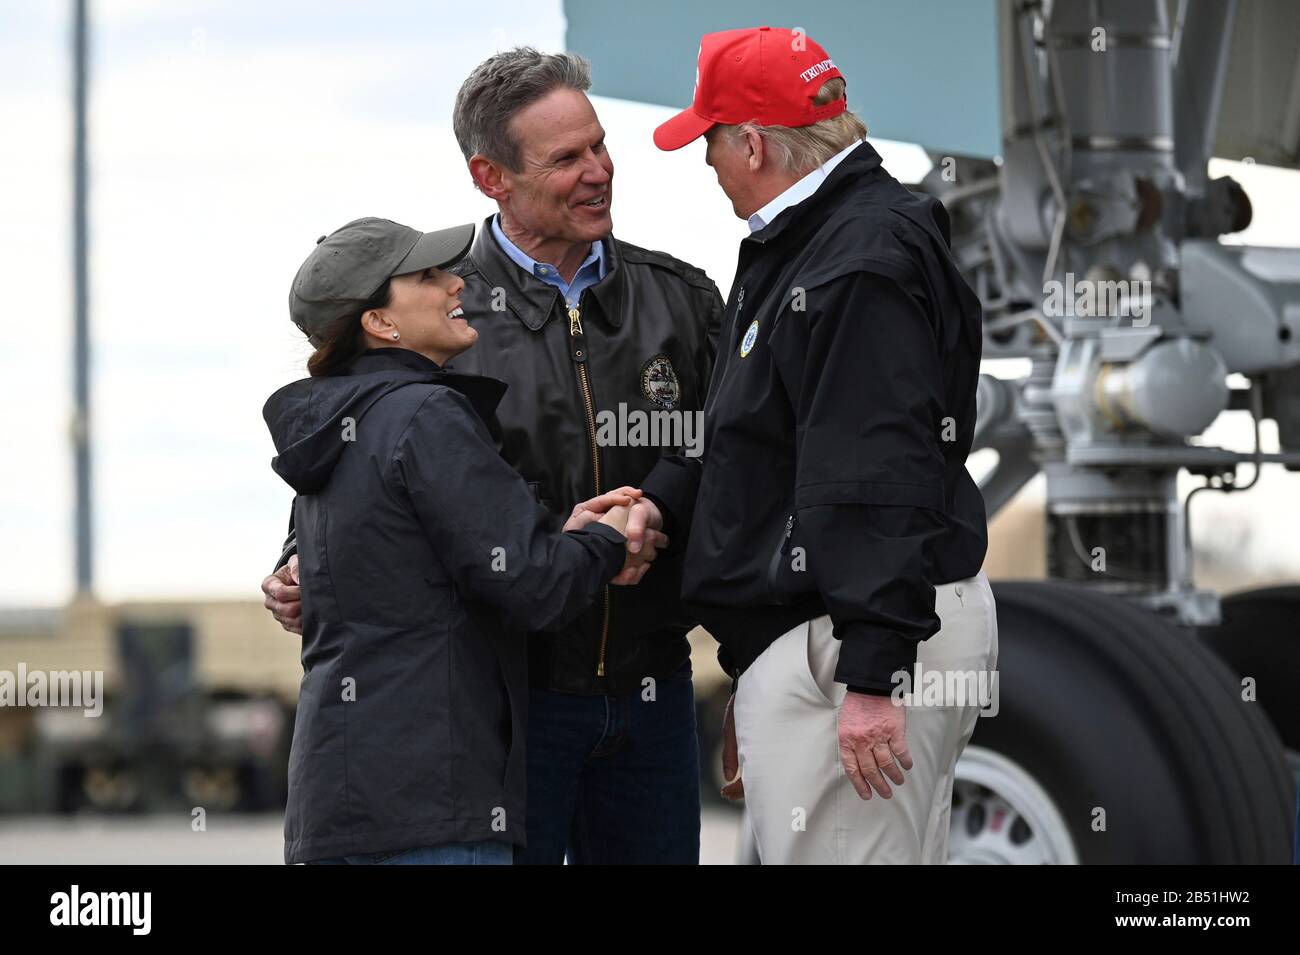 U.S President Donald Trump is greeted by Bill Lee, governor of Tennessee, and wife Maria Lee, after stepping off Air Force One at Berry Field Air National Guard Base March 6, 2020 in Nashville, Tennessee. Trump visited Nashville to survey tornado damage that killed more than 20 people. Stock Photo